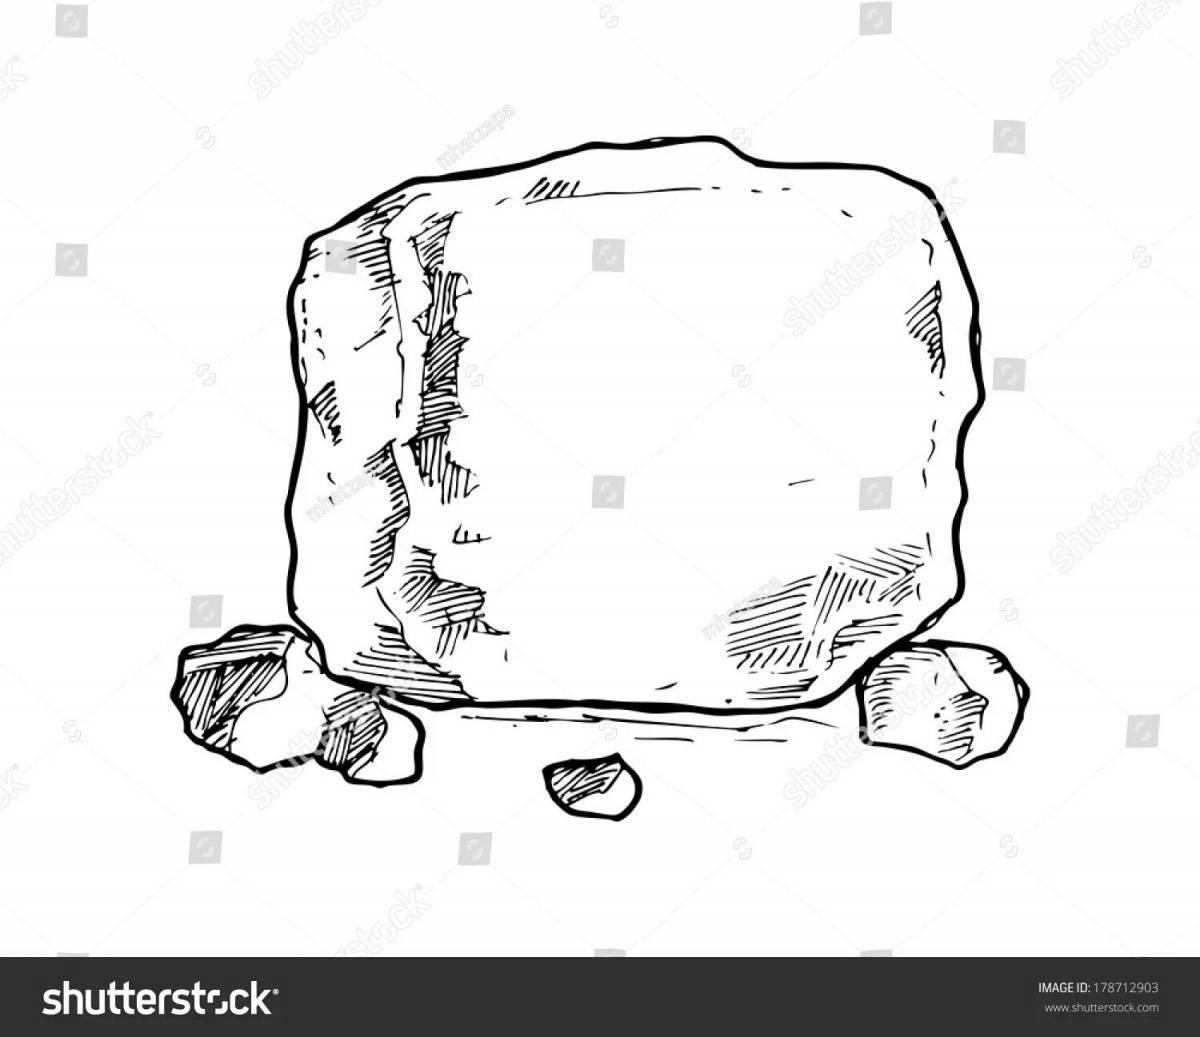 Playful rock coloring page for kids